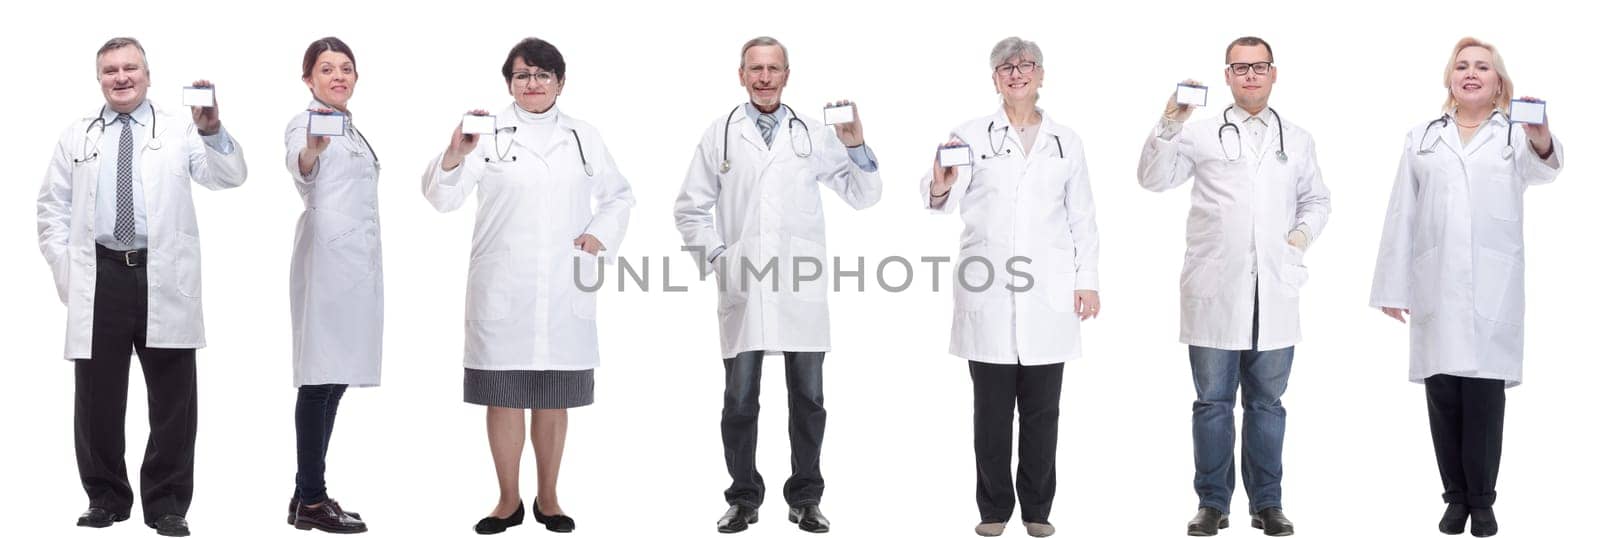 full length group of doctors showing badge isolated by asdf